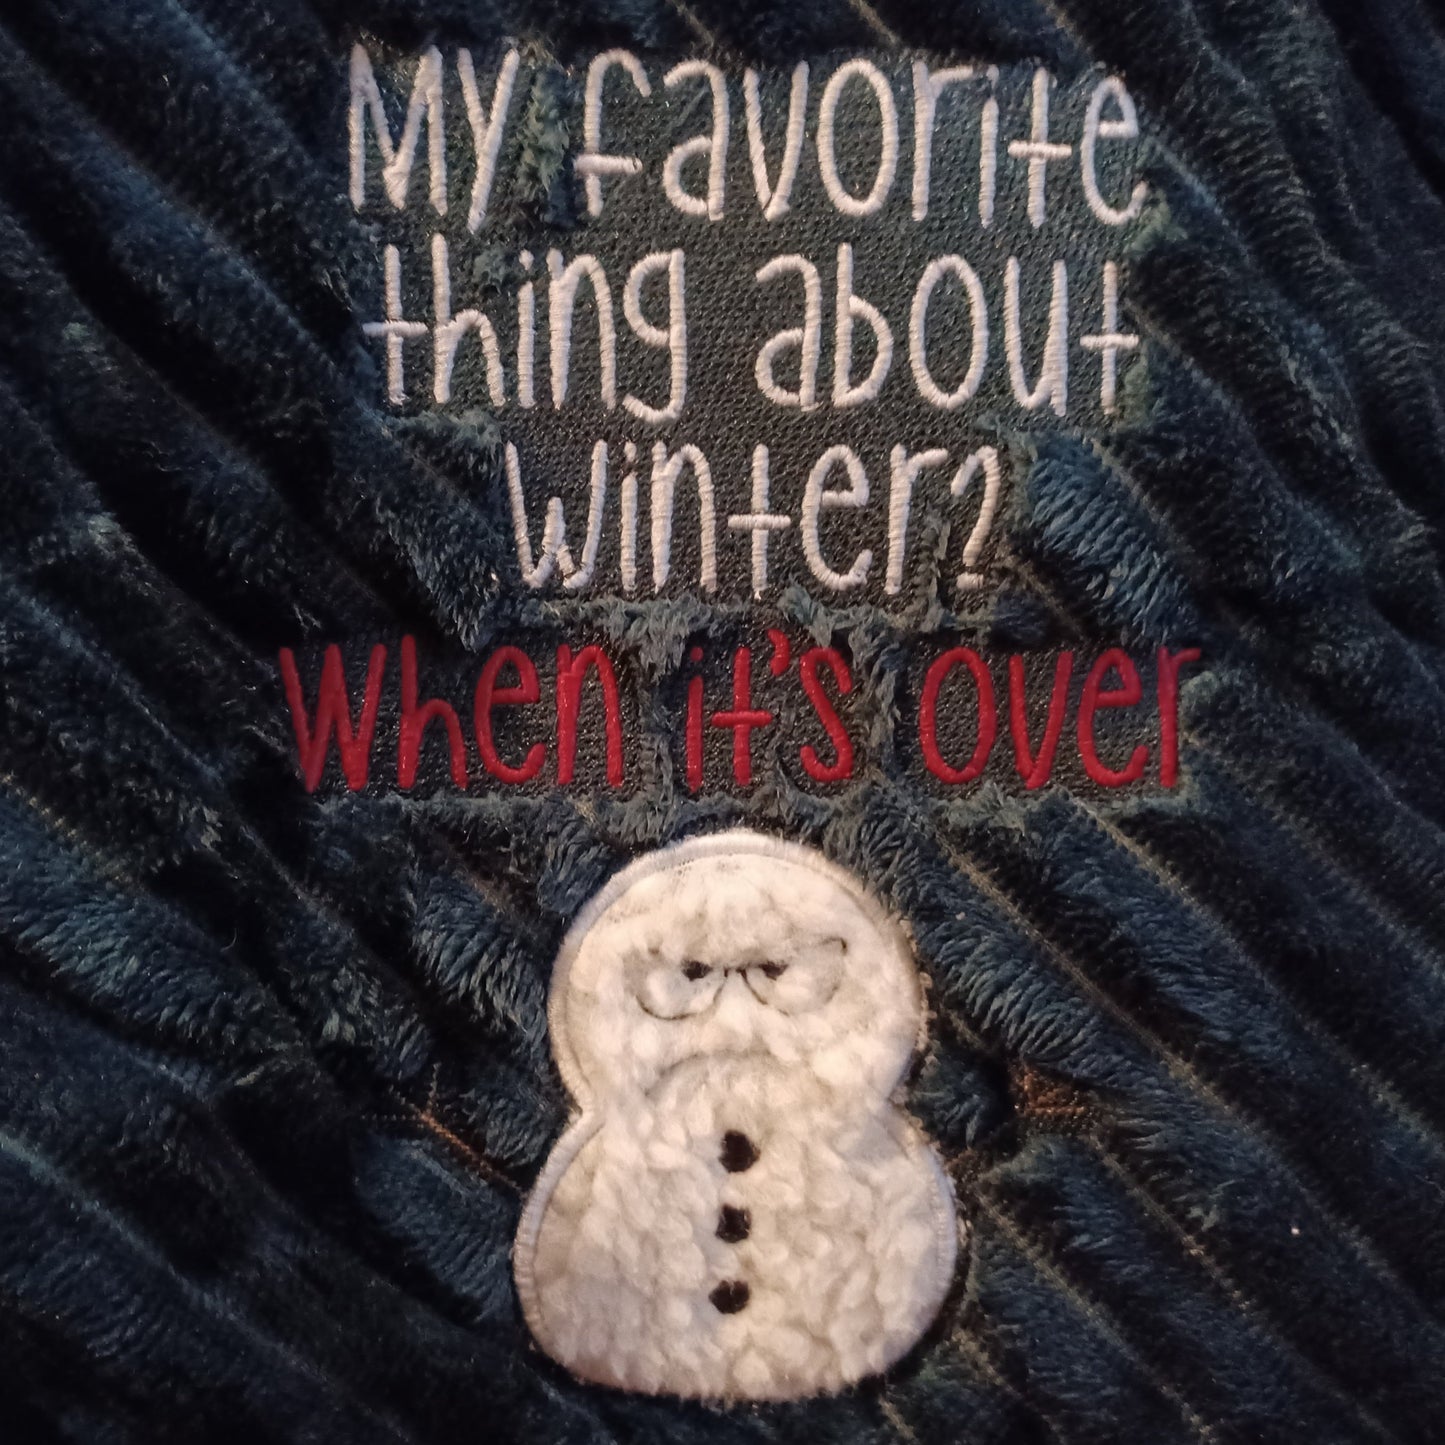 "My Favorite Thing About Winter? When it's Over" Velvet Plush Sherpa Throw Blanket